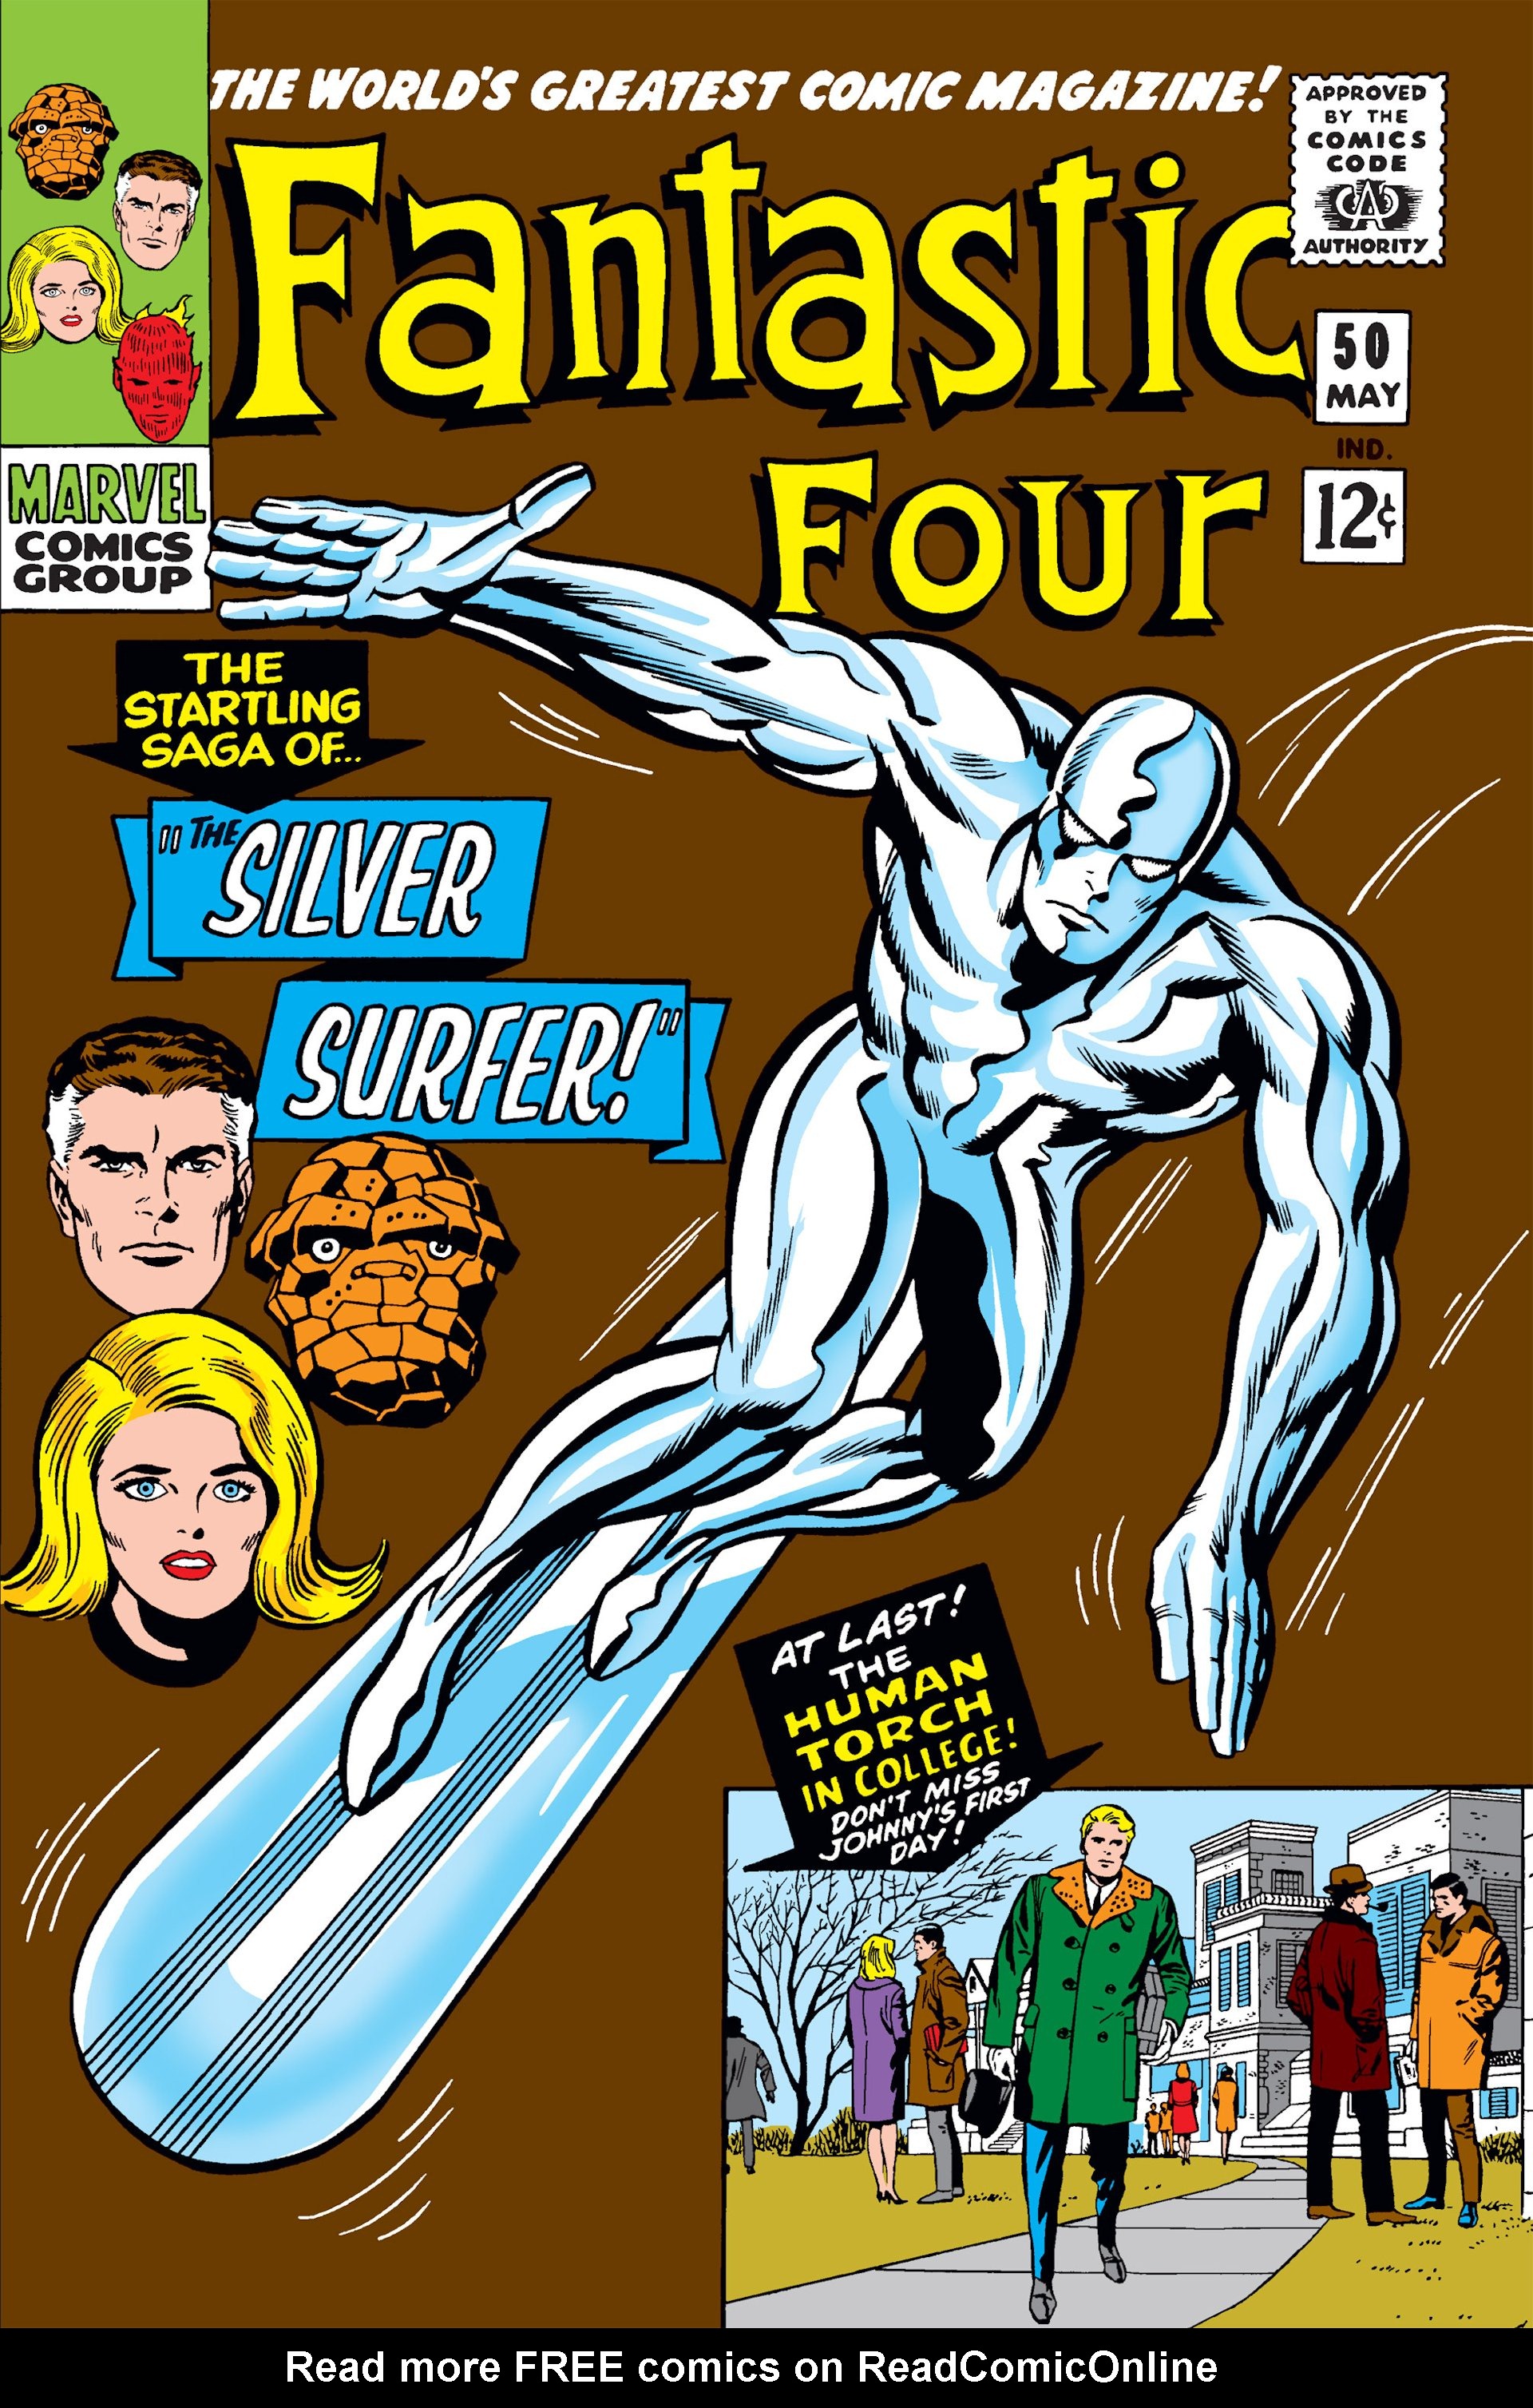 Read online Fantastic Four (1961) comic -  Issue #50 - 1